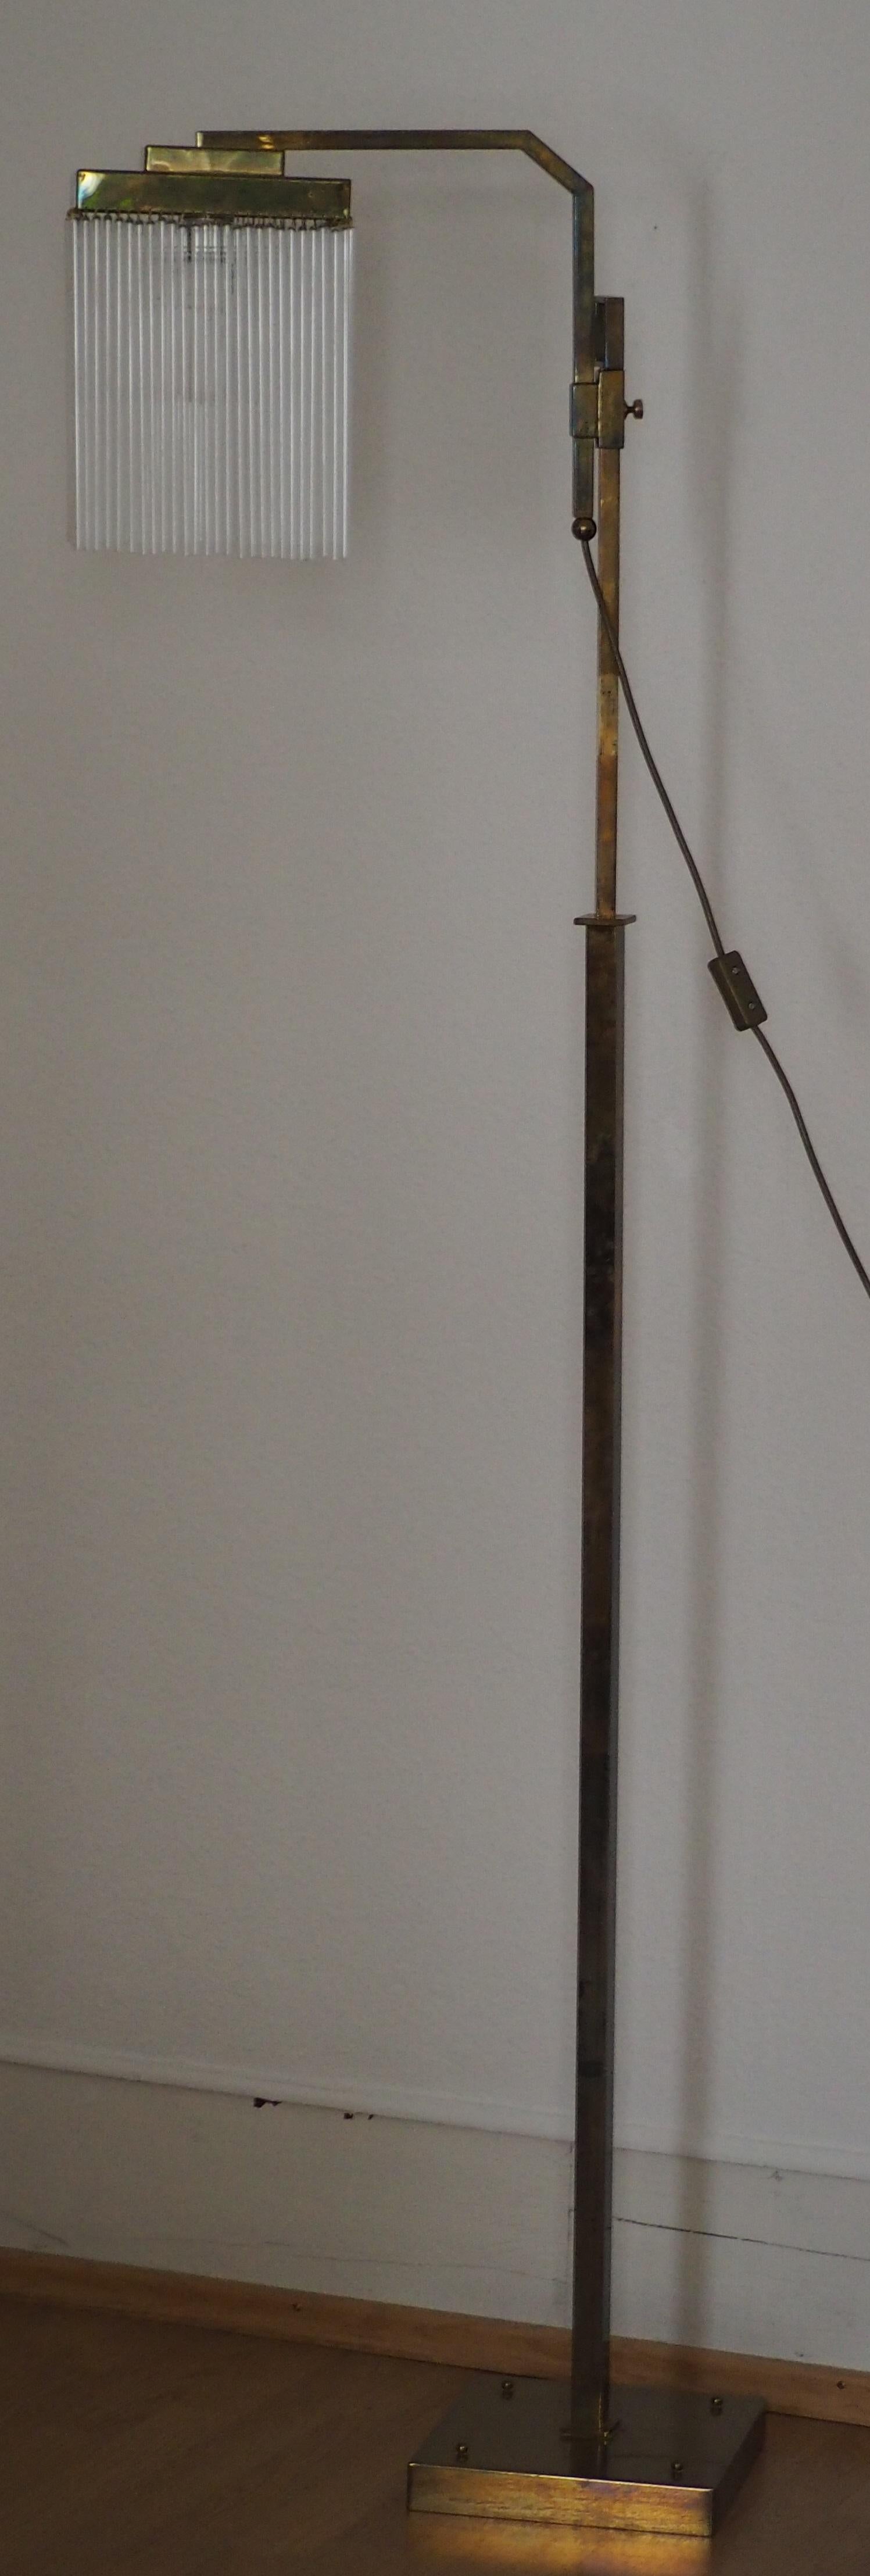 Rare Brass and Glass Floor Lamp From Vienna, Koloman Moser, Otto Wagner Style 2